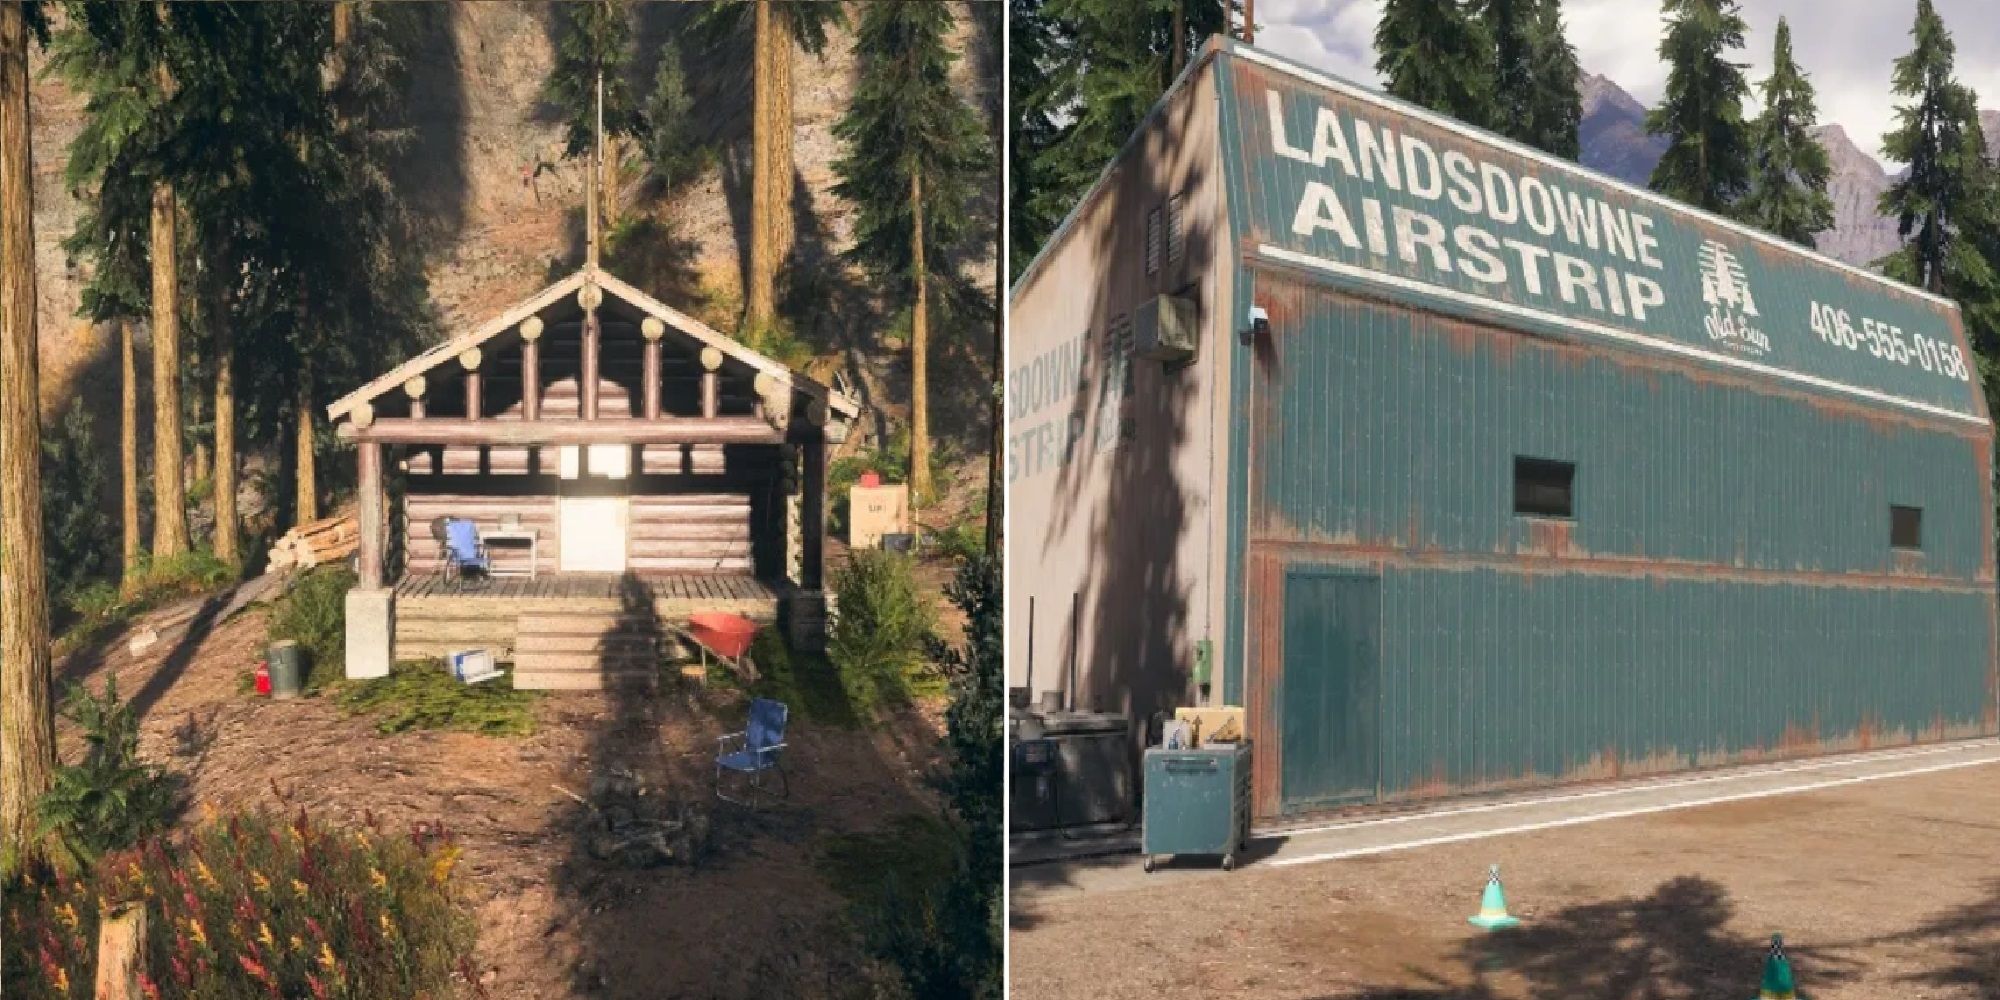 Far Cry 5 split image wooden house in woodland and Landsdowne Airstrip building